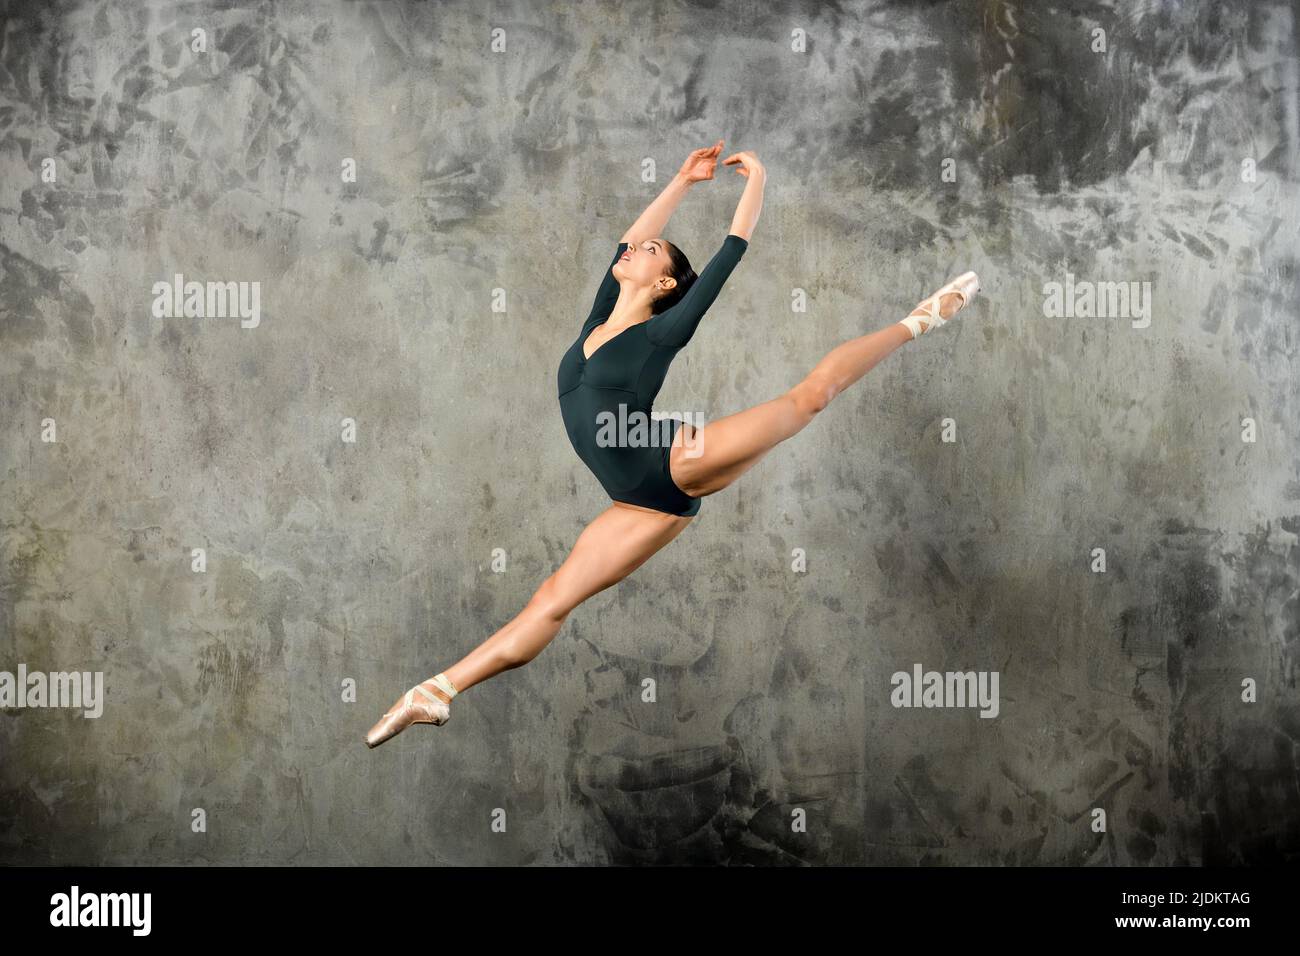 Graceful young ballerina leaping high in the air in a studio portrait against a grey wall with copyspace Stock Photo